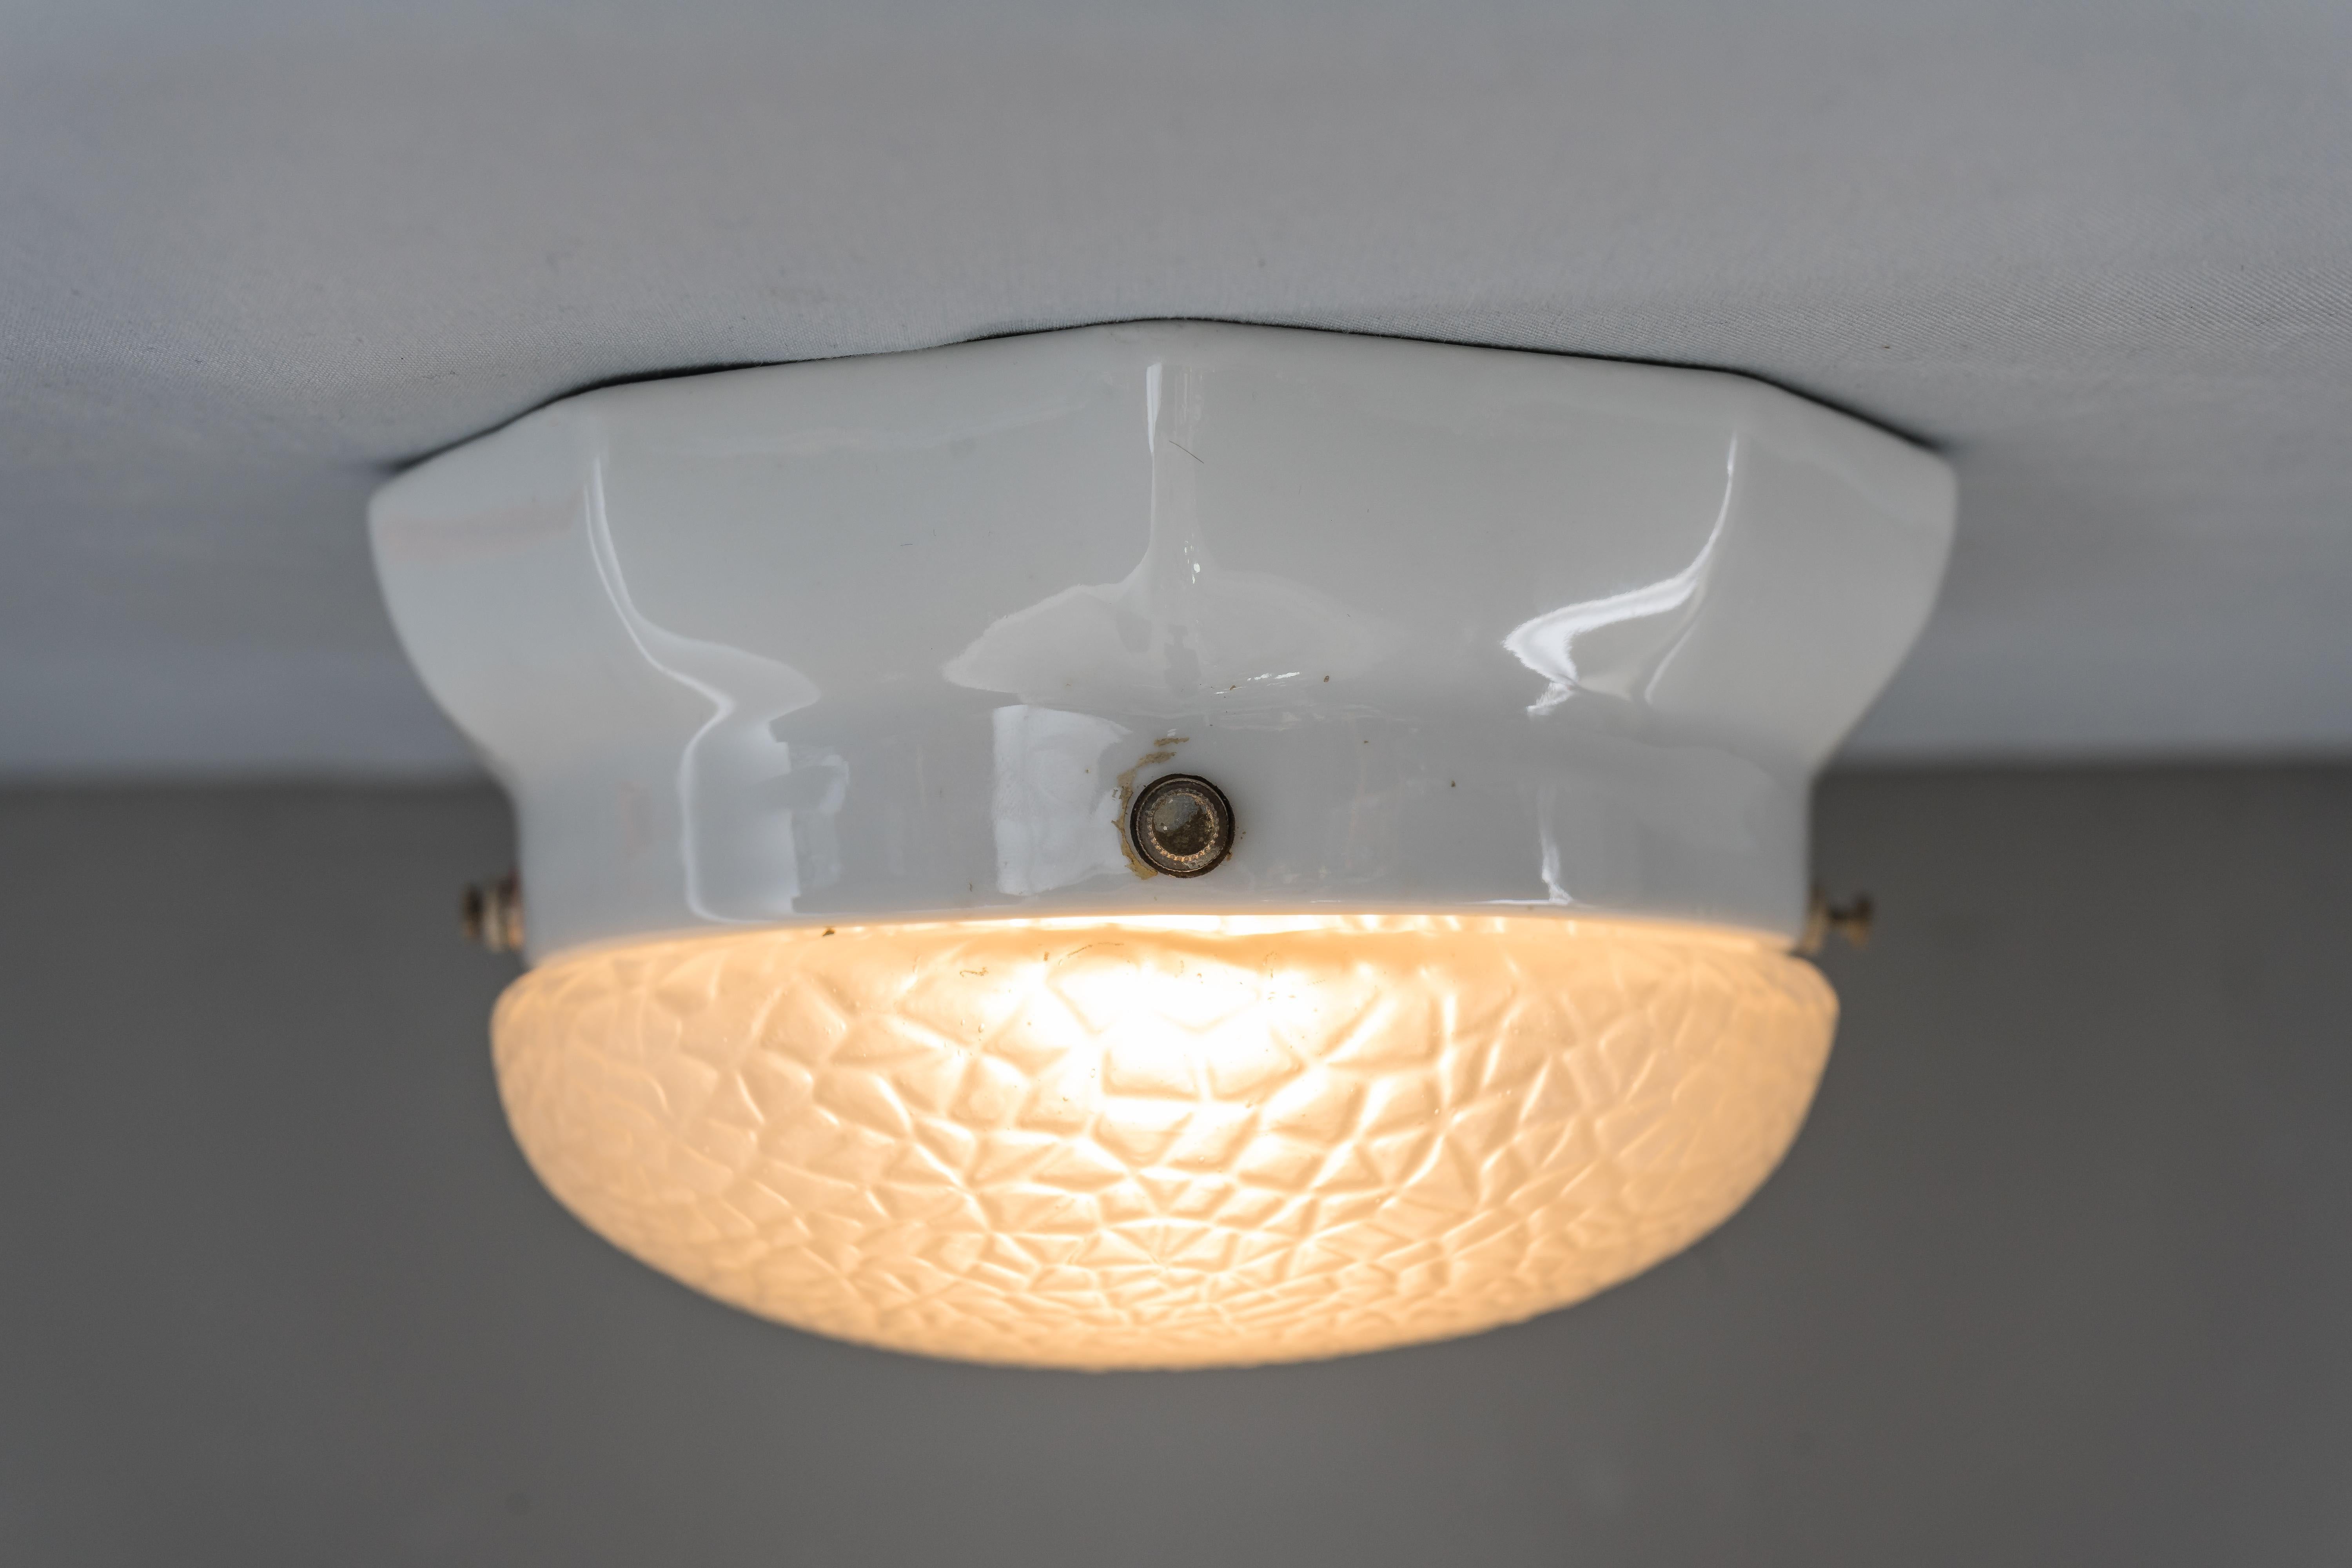 White Oval Porcelain Wall or Ceiling Lamp with Original Glass Shade, circa 1920s For Sale 9